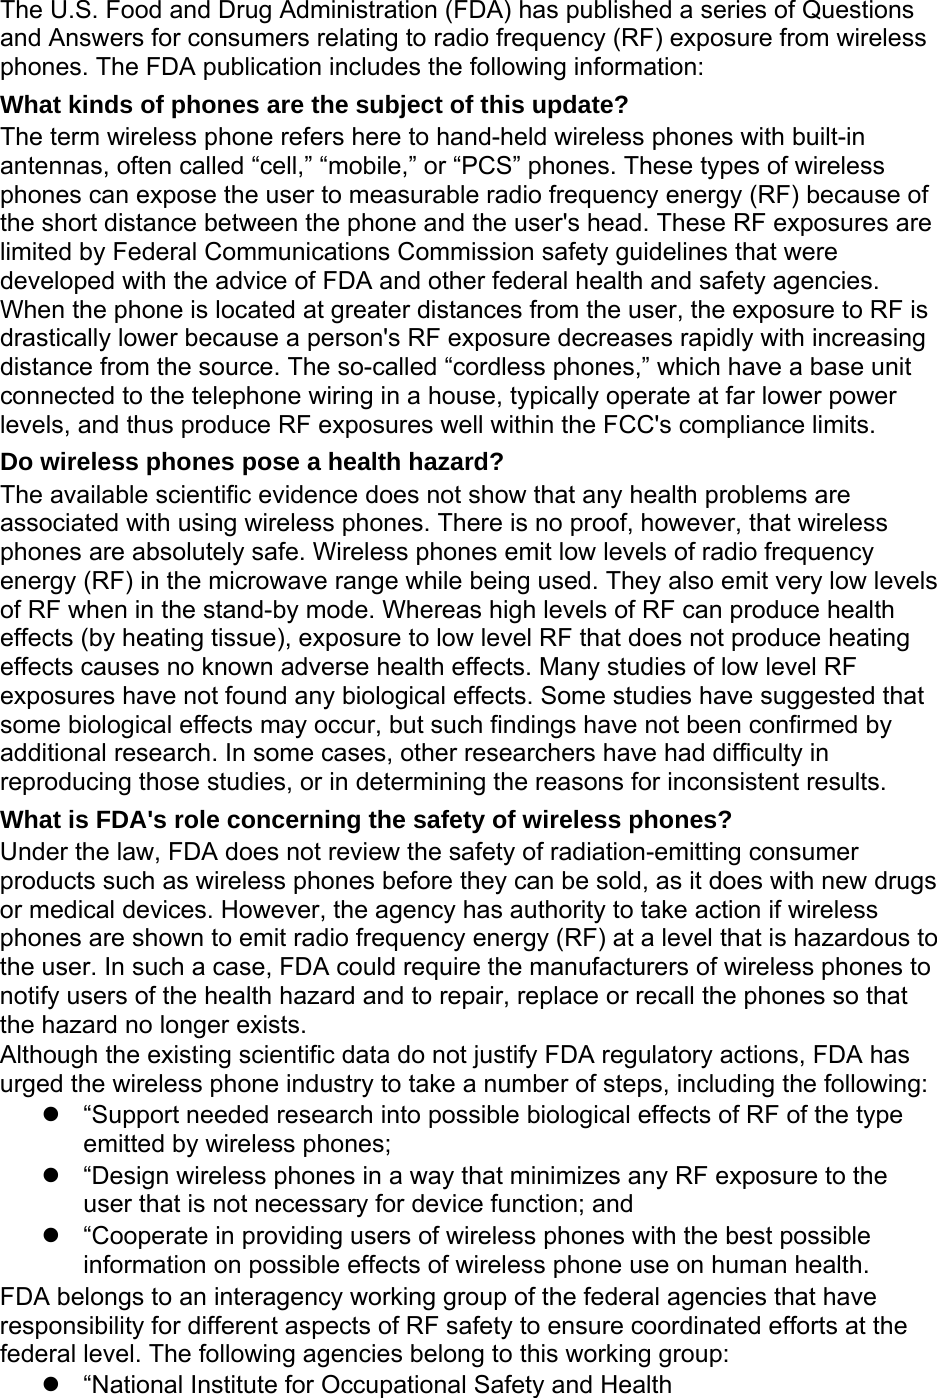 The U.S. Food and Drug Administration (FDA) has published a series of Questions and Answers for consumers relating to radio frequency (RF) exposure from wireless phones. The FDA publication includes the following information: What kinds of phones are the subject of this update? The term wireless phone refers here to hand-held wireless phones with built-in antennas, often called “cell,” “mobile,” or “PCS” phones. These types of wireless phones can expose the user to measurable radio frequency energy (RF) because of the short distance between the phone and the user&apos;s head. These RF exposures are limited by Federal Communications Commission safety guidelines that were developed with the advice of FDA and other federal health and safety agencies. When the phone is located at greater distances from the user, the exposure to RF is drastically lower because a person&apos;s RF exposure decreases rapidly with increasing distance from the source. The so-called “cordless phones,” which have a base unit connected to the telephone wiring in a house, typically operate at far lower power levels, and thus produce RF exposures well within the FCC&apos;s compliance limits. Do wireless phones pose a health hazard? The available scientific evidence does not show that any health problems are associated with using wireless phones. There is no proof, however, that wireless phones are absolutely safe. Wireless phones emit low levels of radio frequency energy (RF) in the microwave range while being used. They also emit very low levels of RF when in the stand-by mode. Whereas high levels of RF can produce health effects (by heating tissue), exposure to low level RF that does not produce heating effects causes no known adverse health effects. Many studies of low level RF exposures have not found any biological effects. Some studies have suggested that some biological effects may occur, but such findings have not been confirmed by additional research. In some cases, other researchers have had difficulty in reproducing those studies, or in determining the reasons for inconsistent results. What is FDA&apos;s role concerning the safety of wireless phones? Under the law, FDA does not review the safety of radiation-emitting consumer products such as wireless phones before they can be sold, as it does with new drugs or medical devices. However, the agency has authority to take action if wireless phones are shown to emit radio frequency energy (RF) at a level that is hazardous to the user. In such a case, FDA could require the manufacturers of wireless phones to notify users of the health hazard and to repair, replace or recall the phones so that the hazard no longer exists. Although the existing scientific data do not justify FDA regulatory actions, FDA has urged the wireless phone industry to take a number of steps, including the following: z  “Support needed research into possible biological effects of RF of the type emitted by wireless phones; z  “Design wireless phones in a way that minimizes any RF exposure to the user that is not necessary for device function; and z  “Cooperate in providing users of wireless phones with the best possible information on possible effects of wireless phone use on human health. FDA belongs to an interagency working group of the federal agencies that have responsibility for different aspects of RF safety to ensure coordinated efforts at the federal level. The following agencies belong to this working group: z  “National Institute for Occupational Safety and Health 